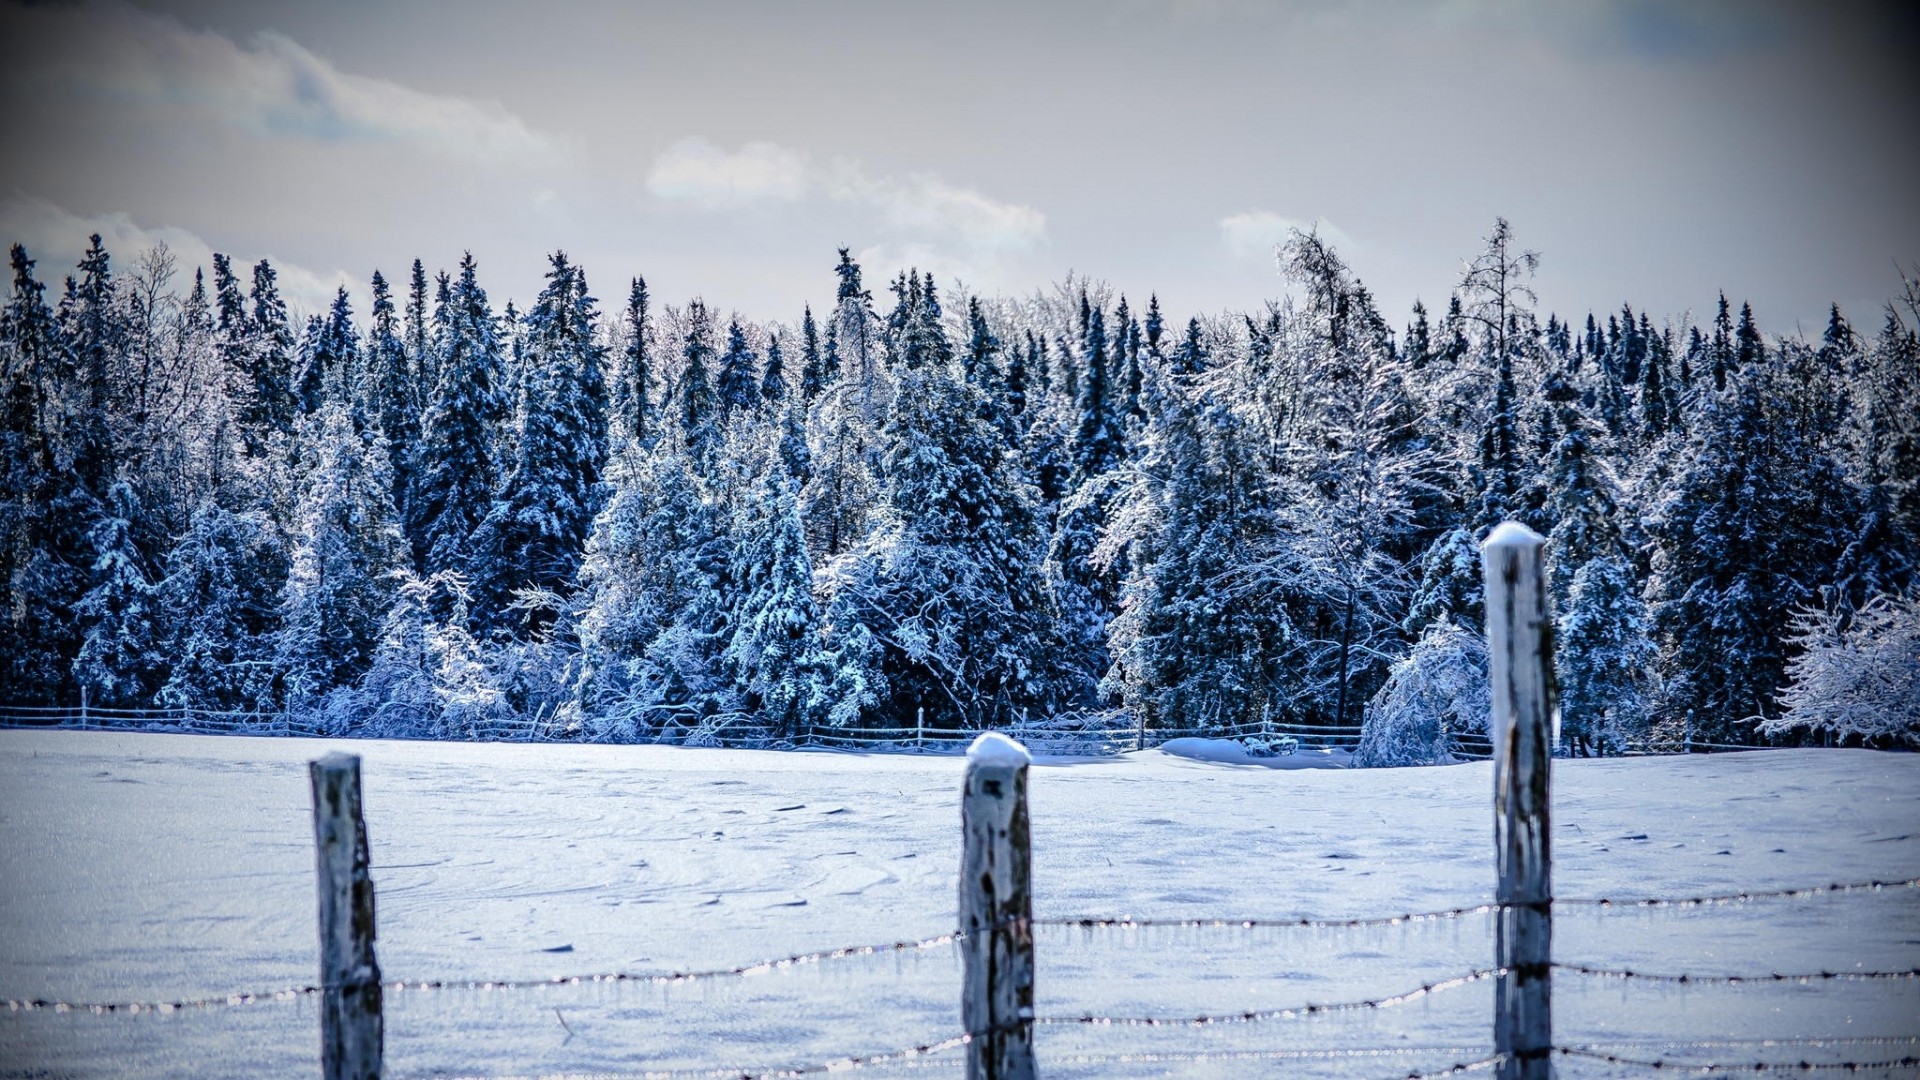 General 1920x1080 snow trees fence field winter ice cold outdoors